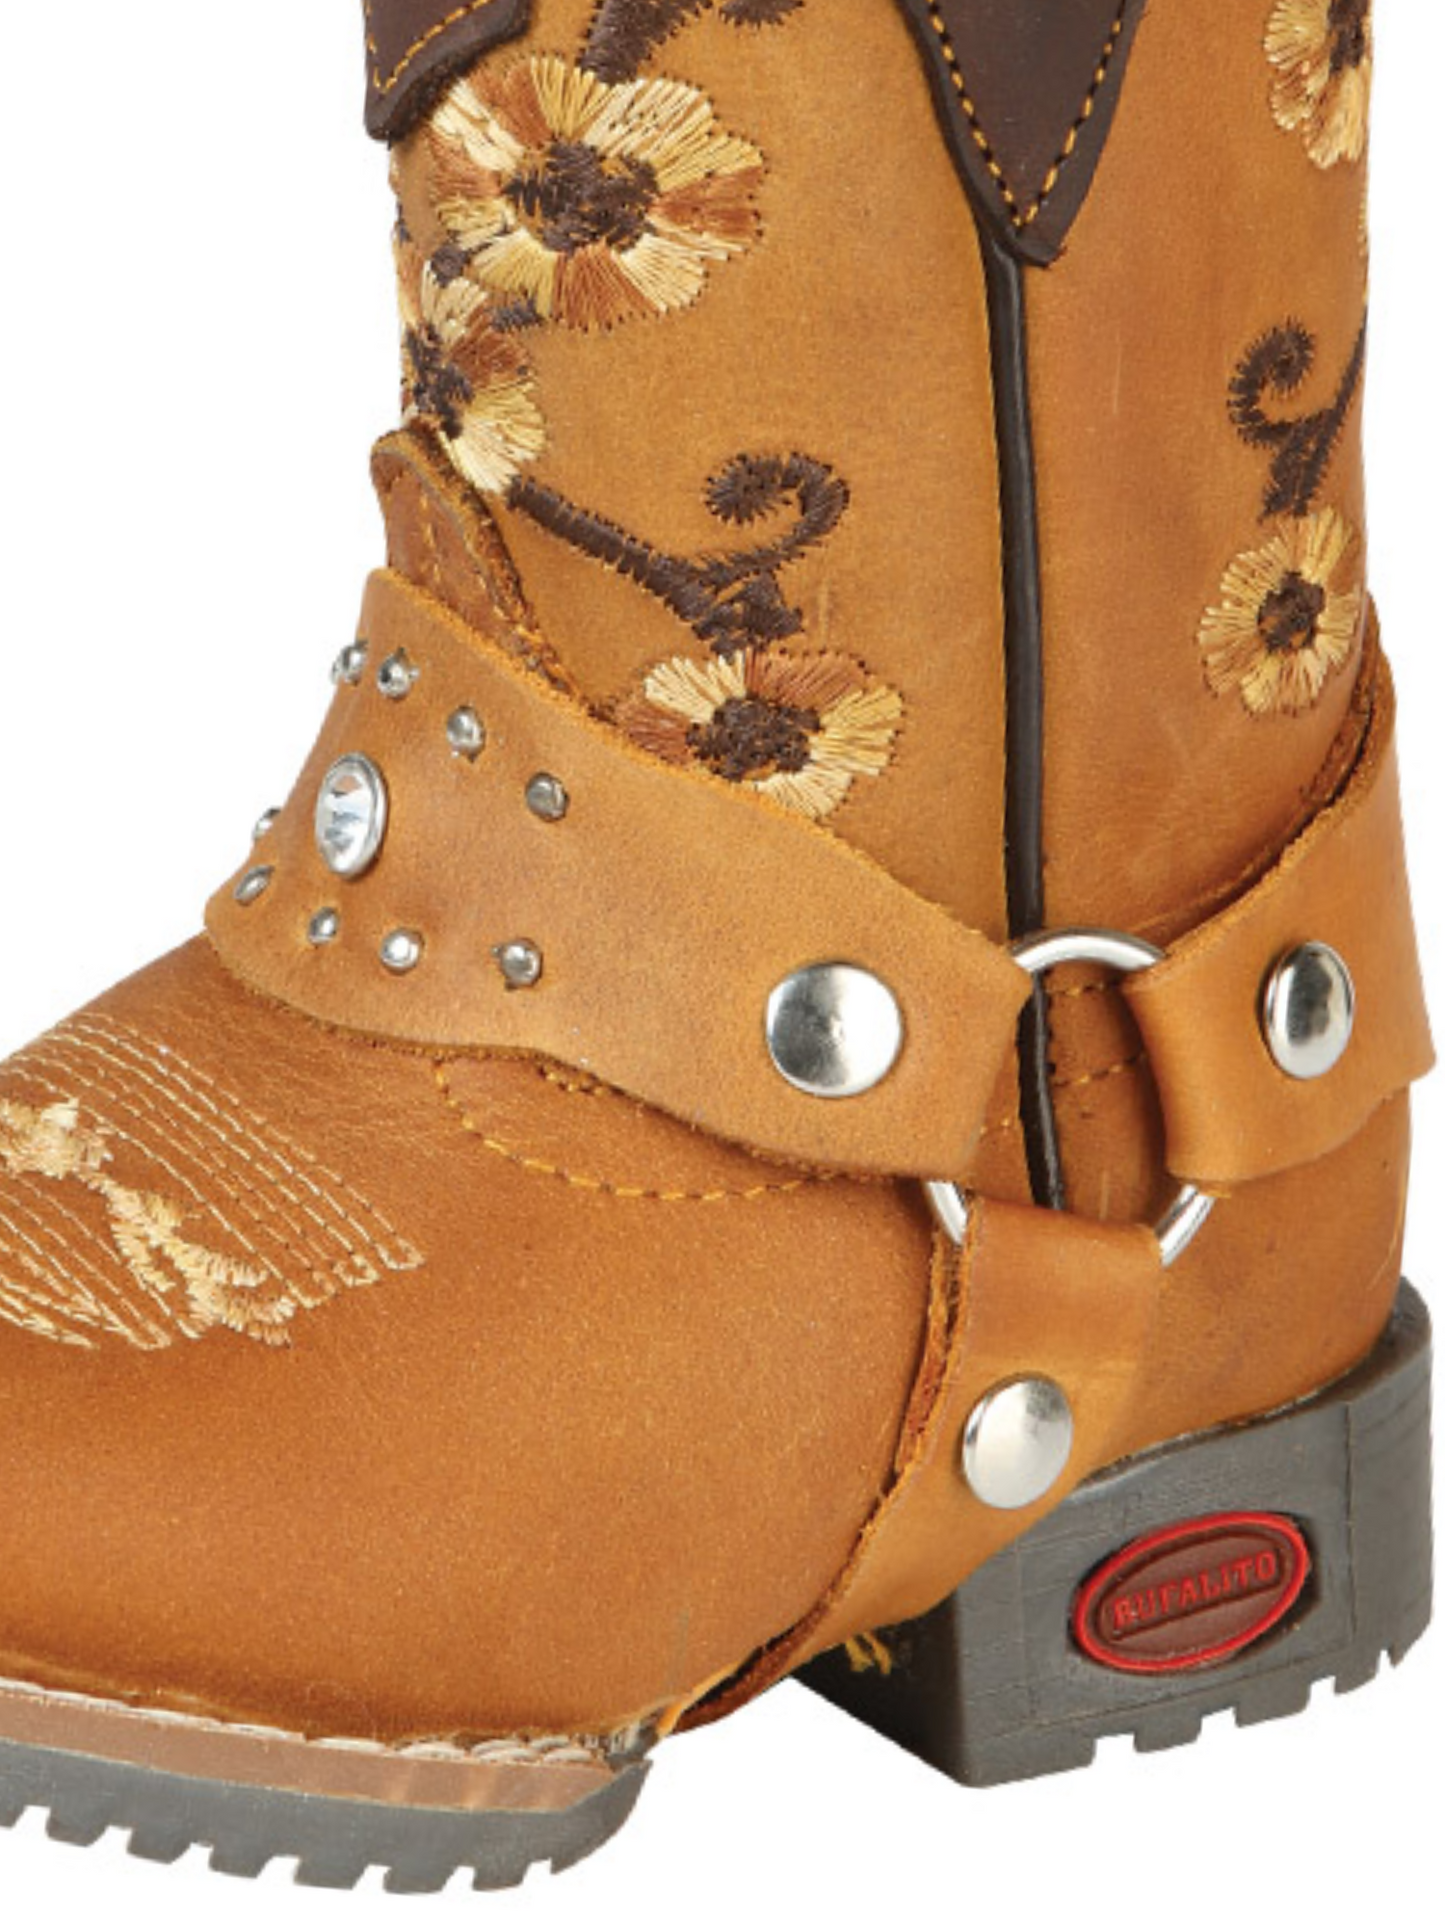 Kids - Classic Rodeo Cowboy Boots with Genuine Leather Harness for Babies 'Jar Boots' - ID: 126575 Cowboy Boots Jar Boots